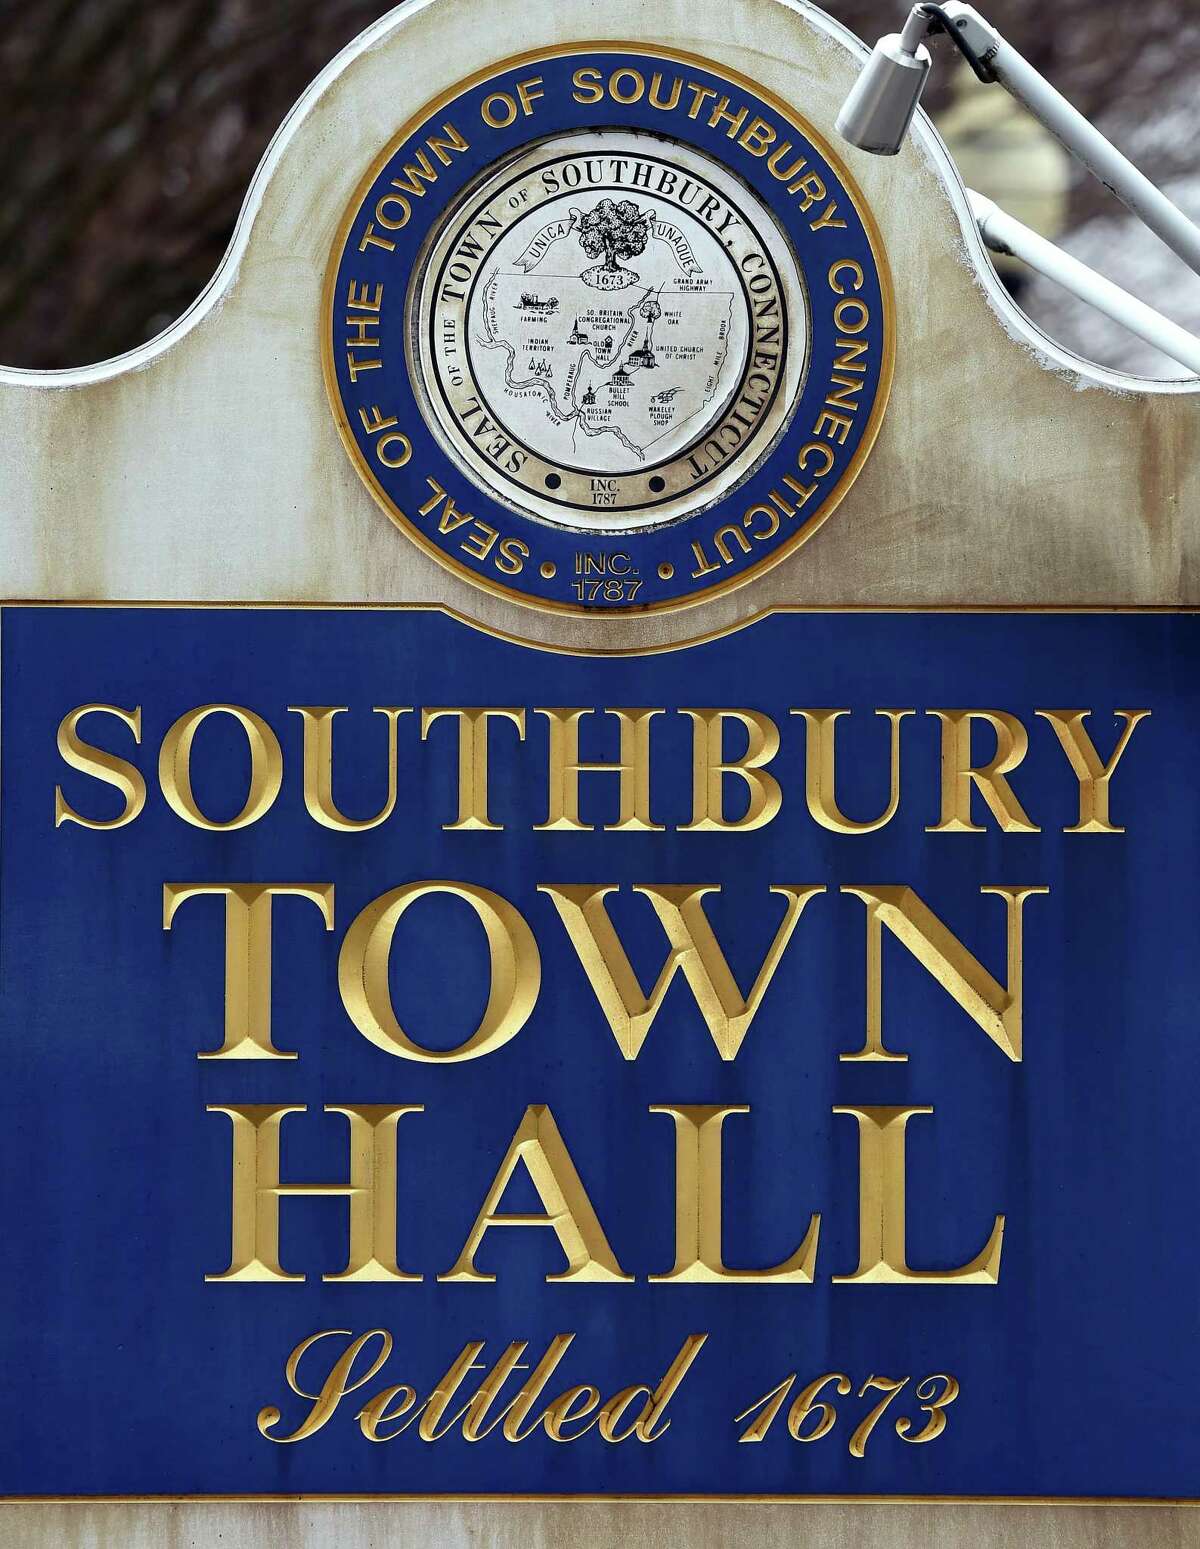 The sign for Southbury Town Hall photographed on April 2, 2021.